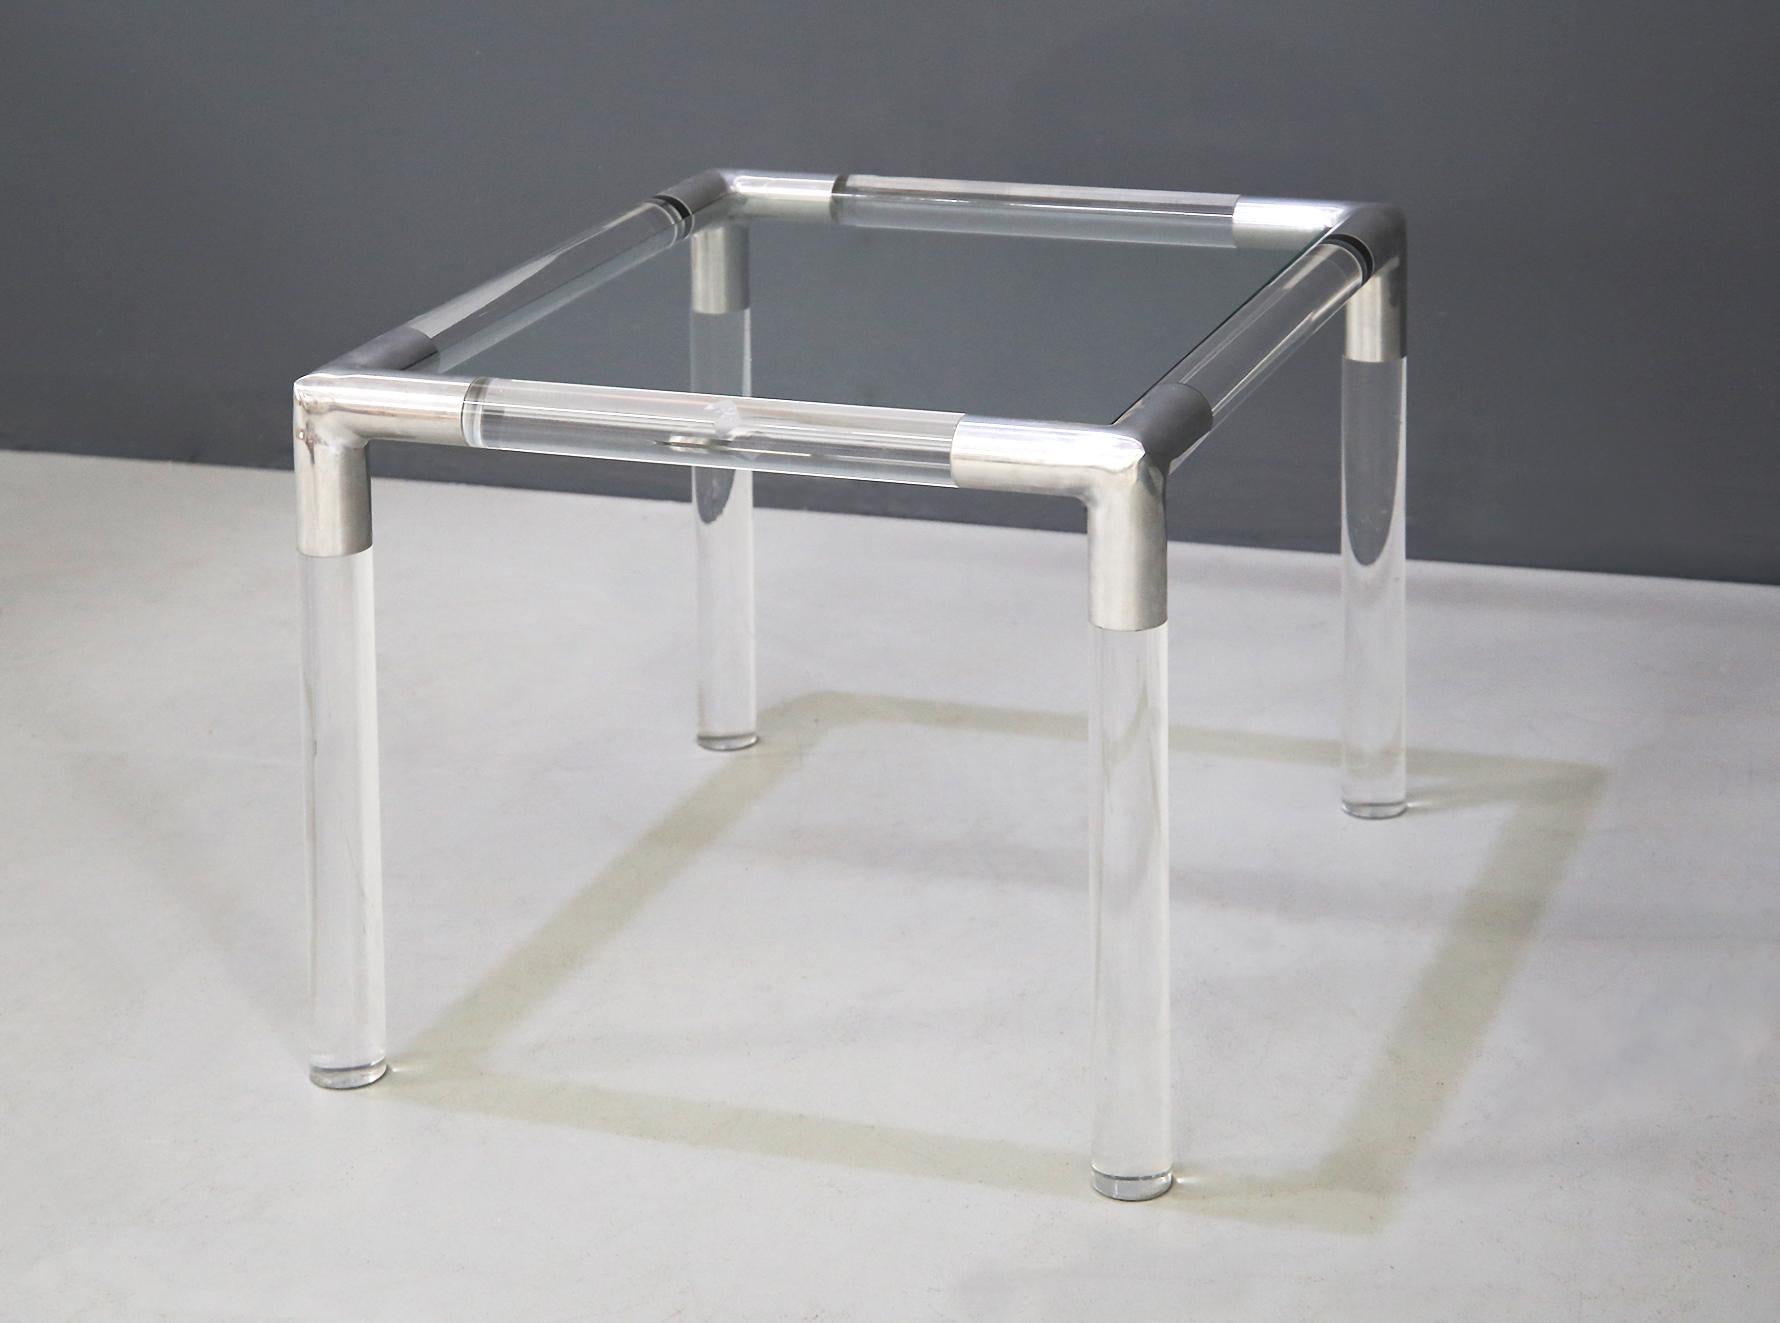 Coffee table designed by Rodney Kinsman for Bieffeplast, from the 1970s in the United Kingdom. The structure is in tubular plexiglass, while the joints connecting the various points of the plexiglass structure are in metallic grey steel. The